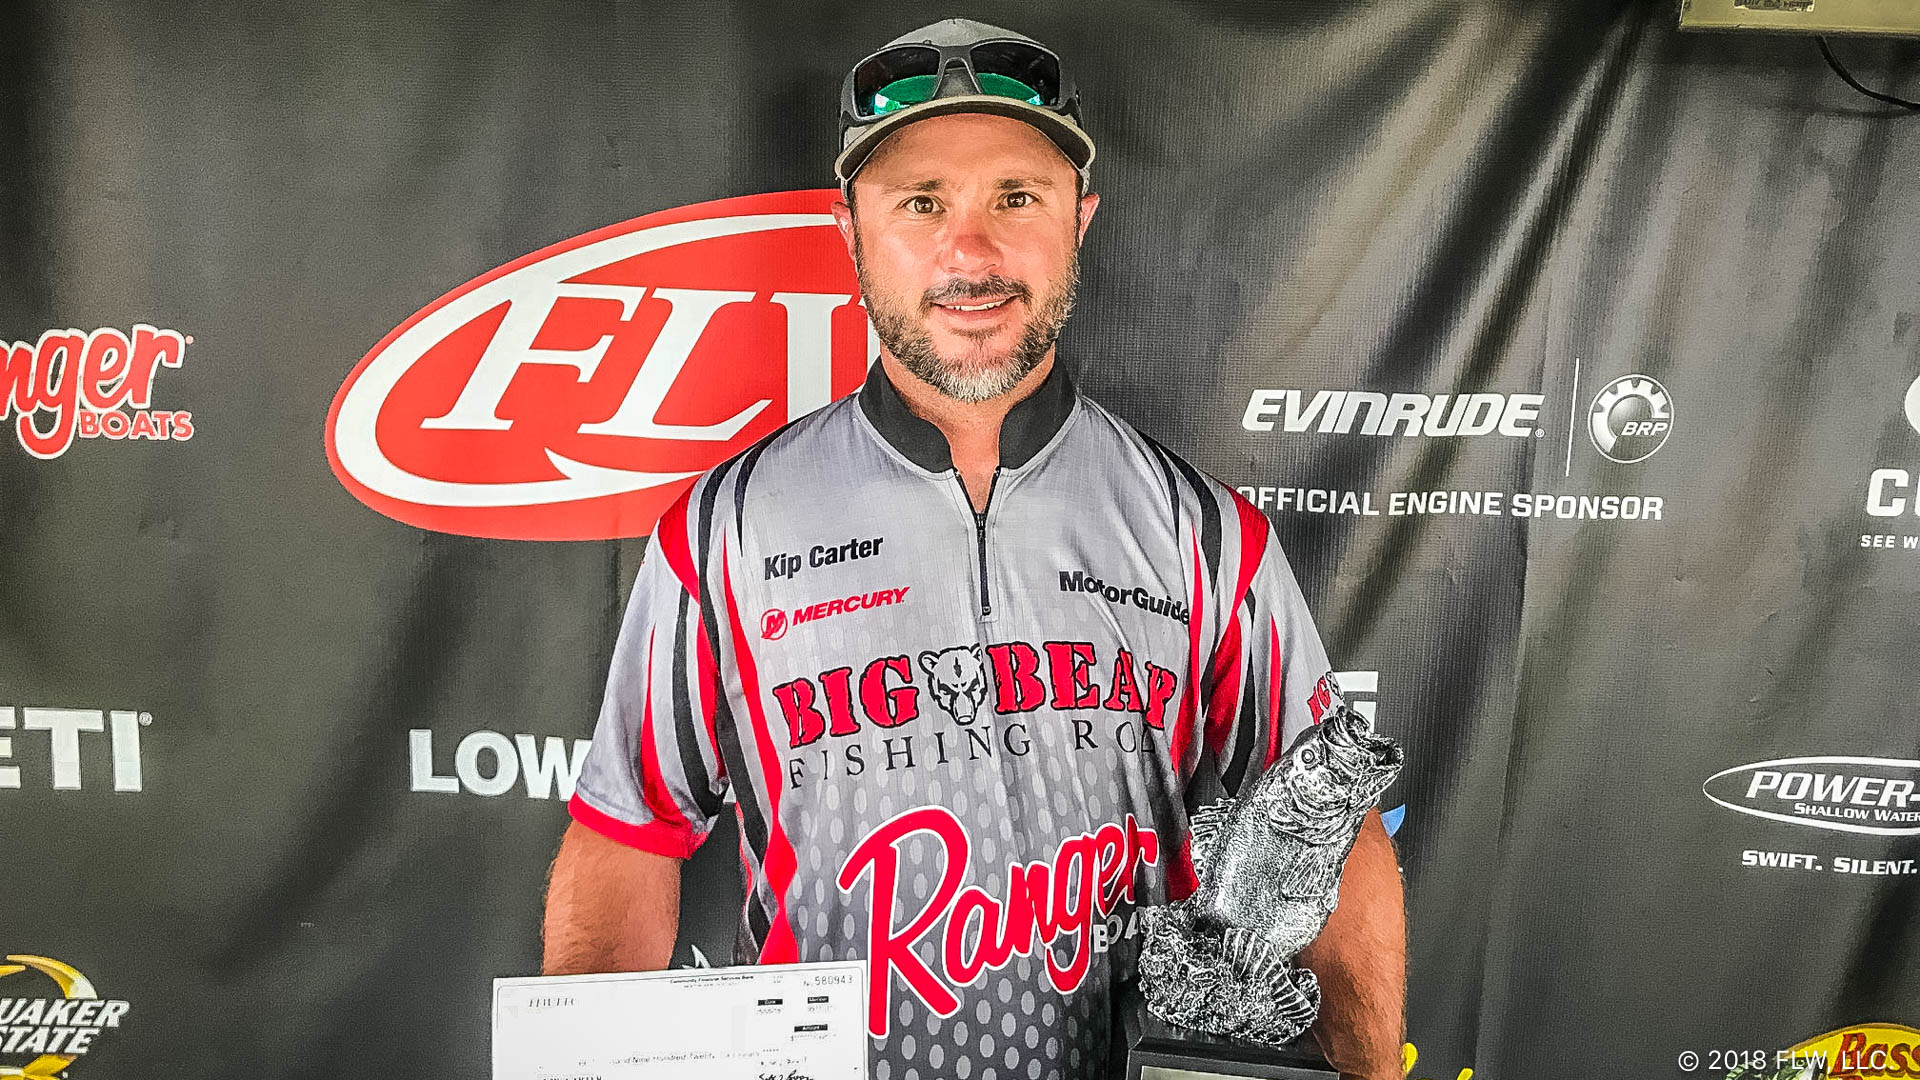 Shad Spawn Clutch for Carter - Major League Fishing